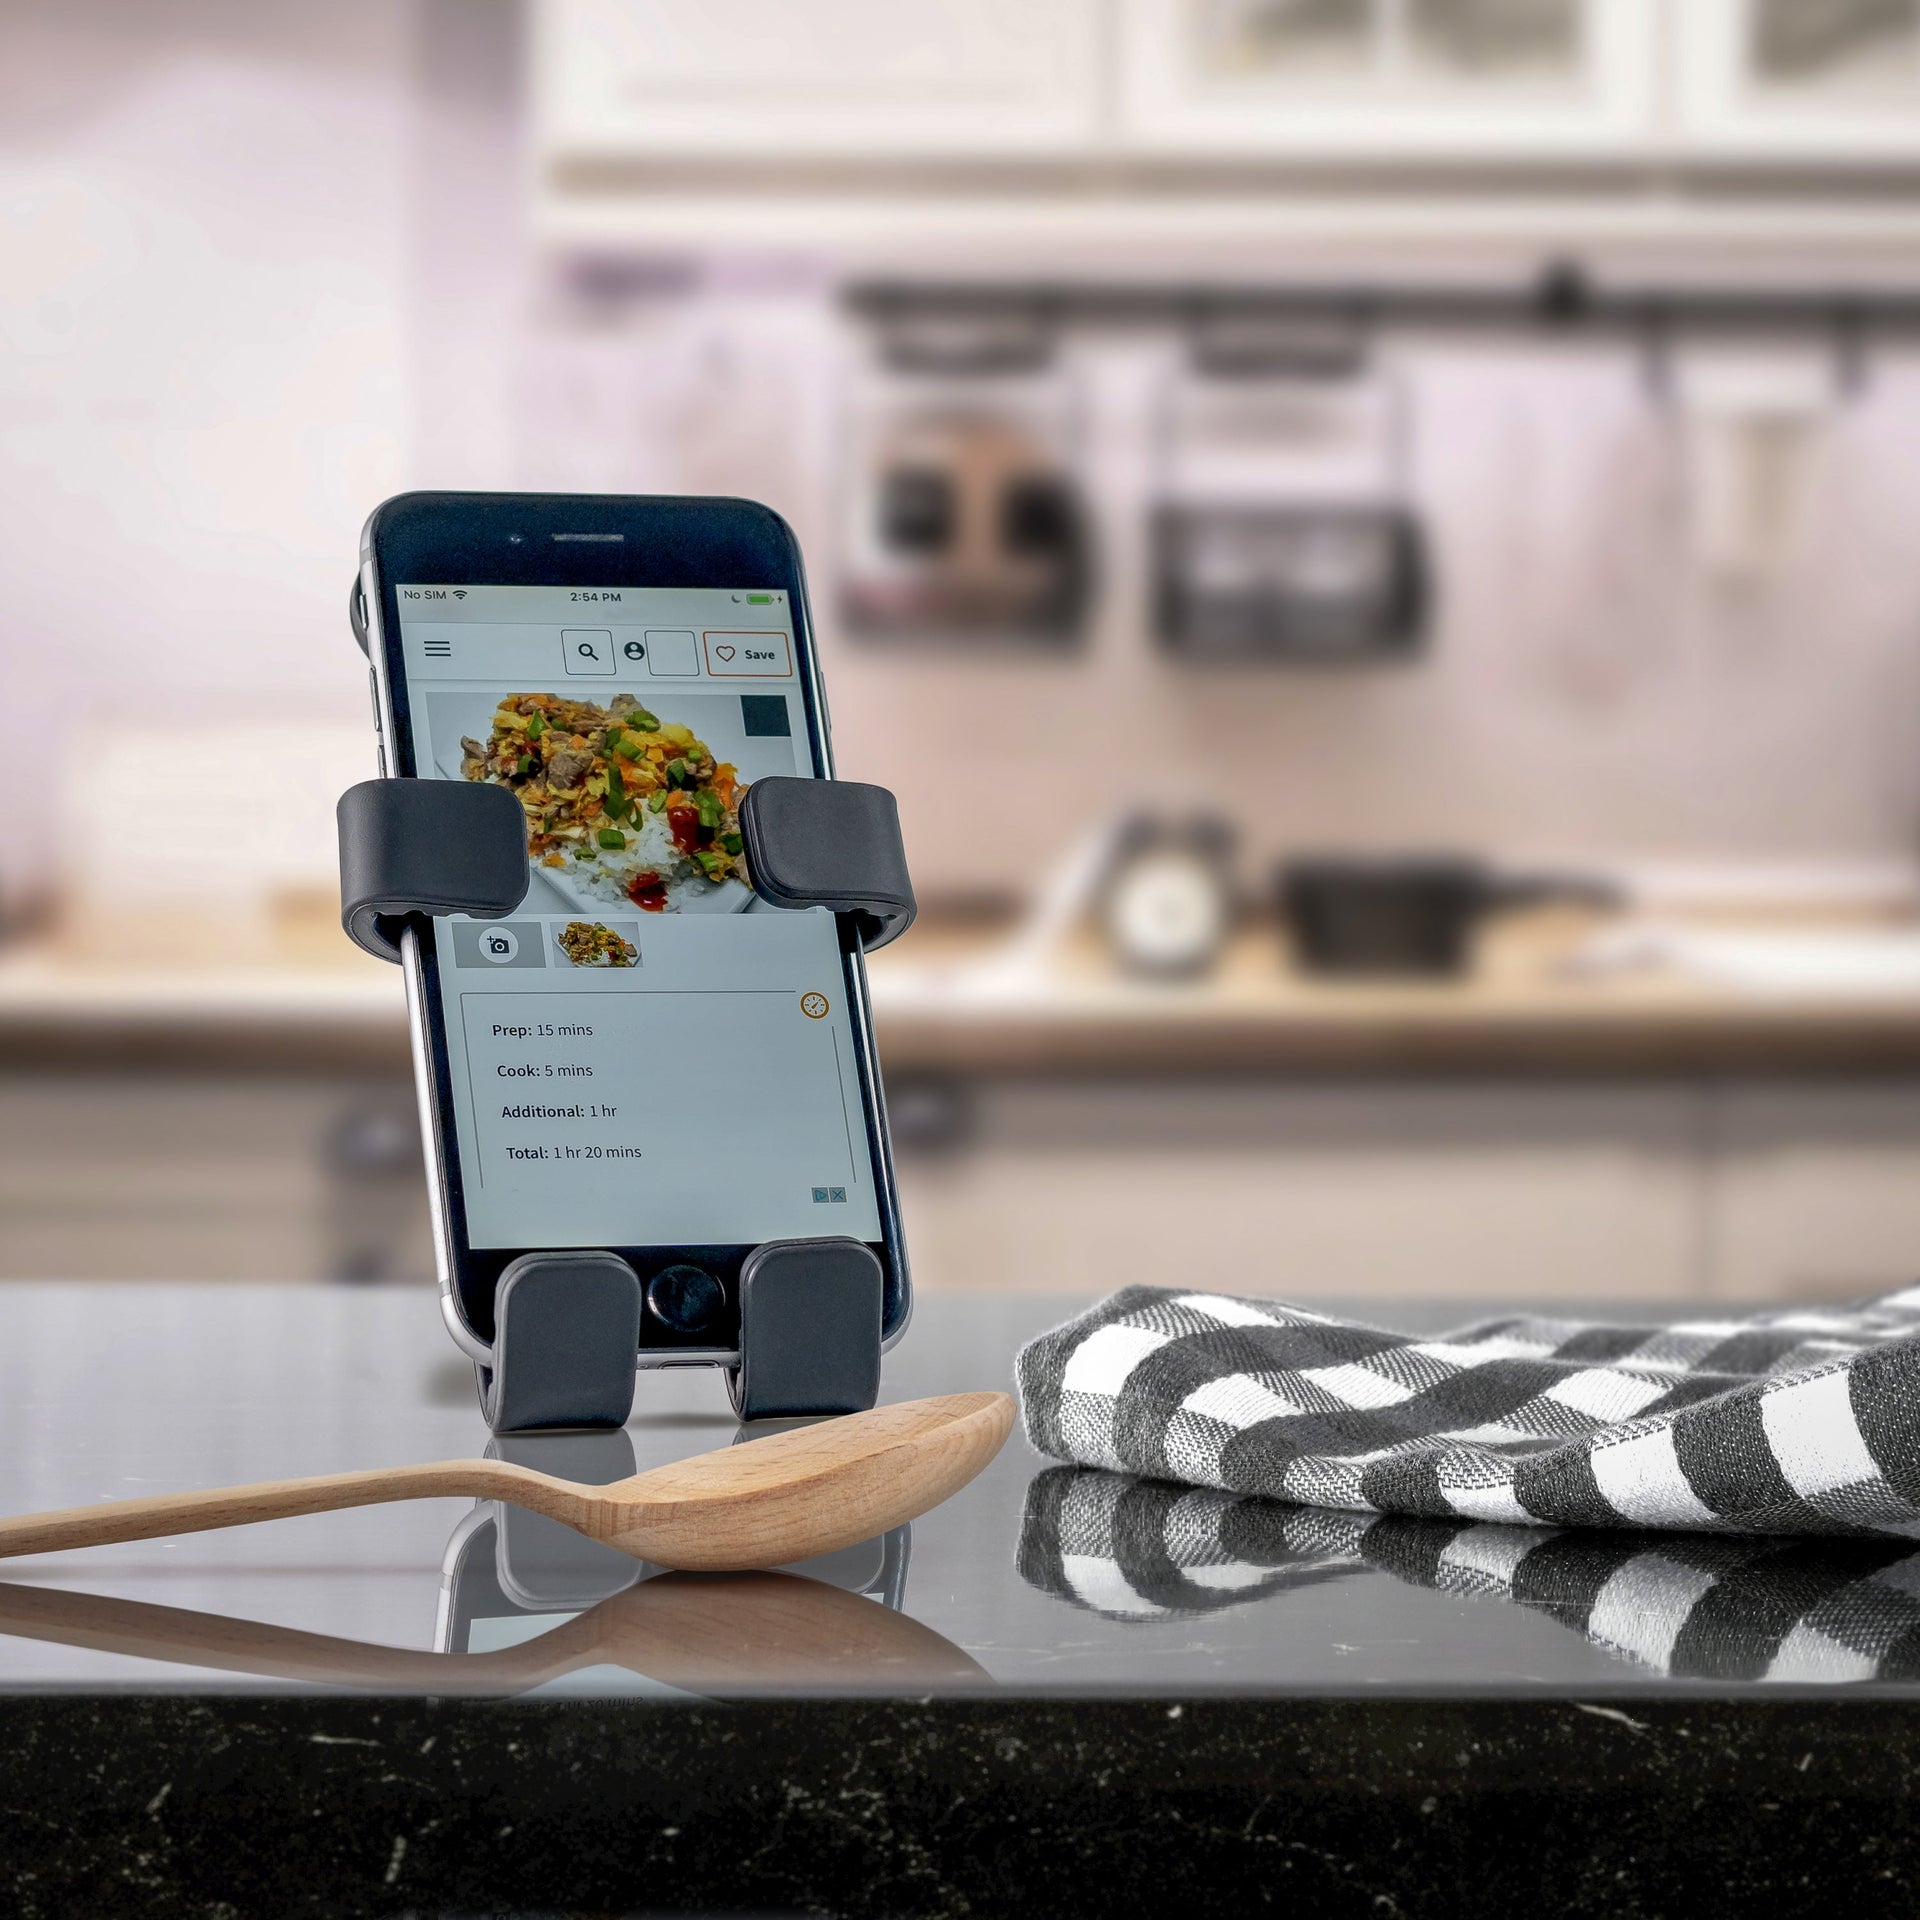 Image of Panda Hug Buddy sitting on a kitchen counter holding a phone with a recipe on the screen.